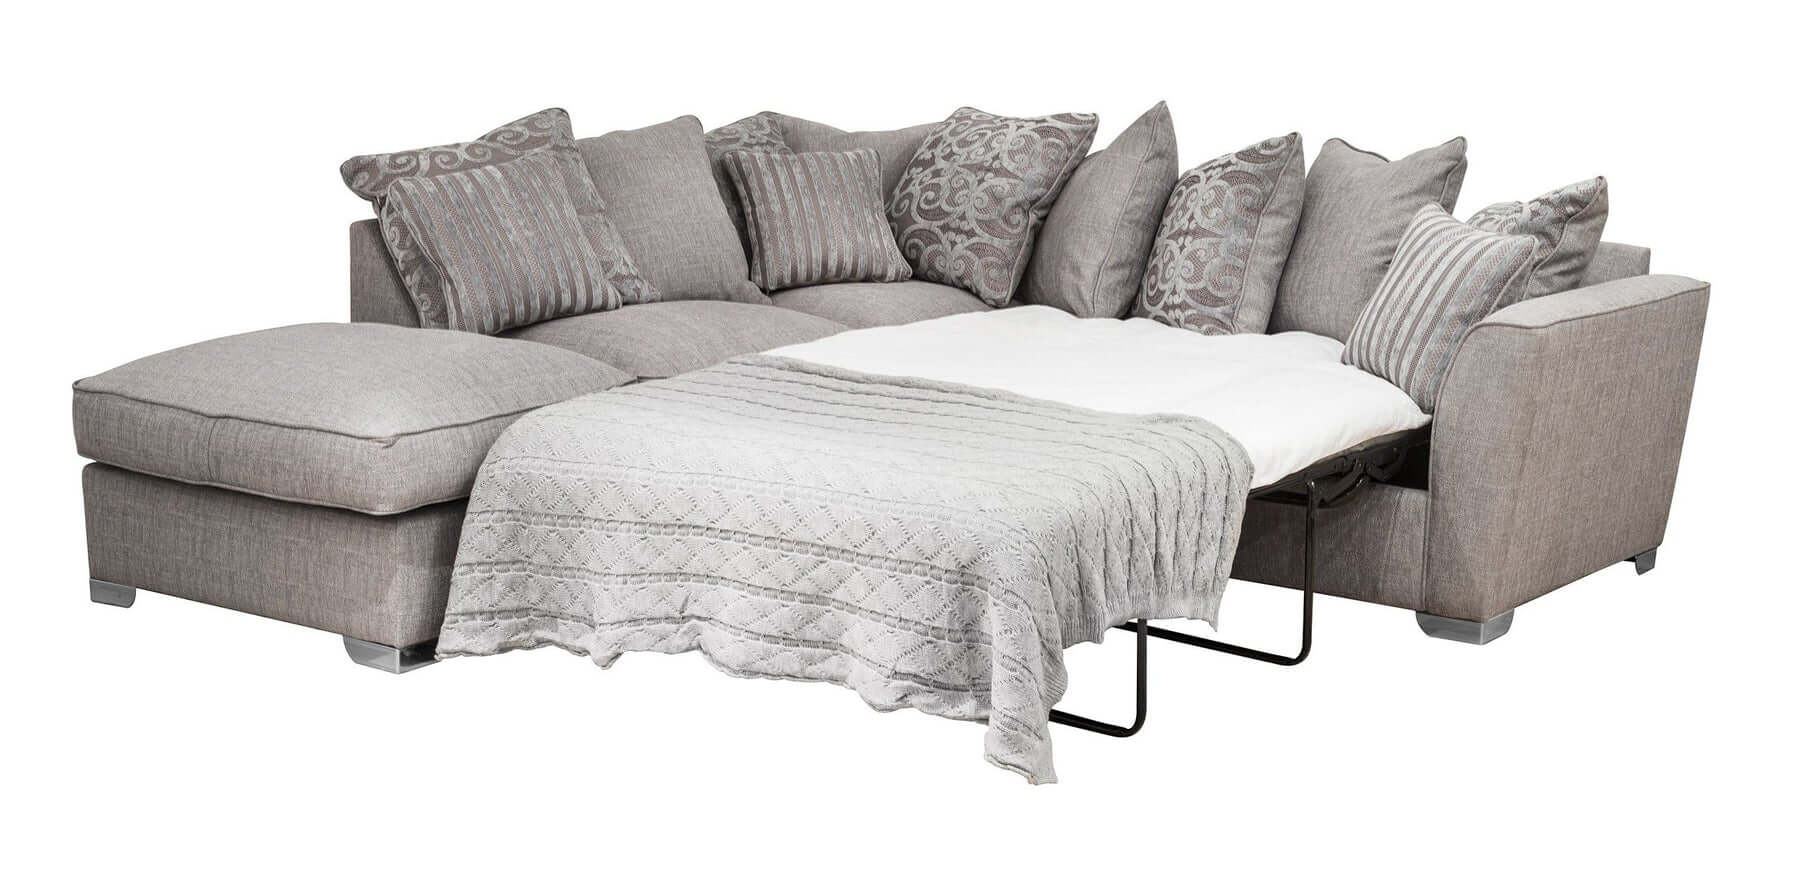 Showing image for Ellsworth right chaise sofa bed + footstool